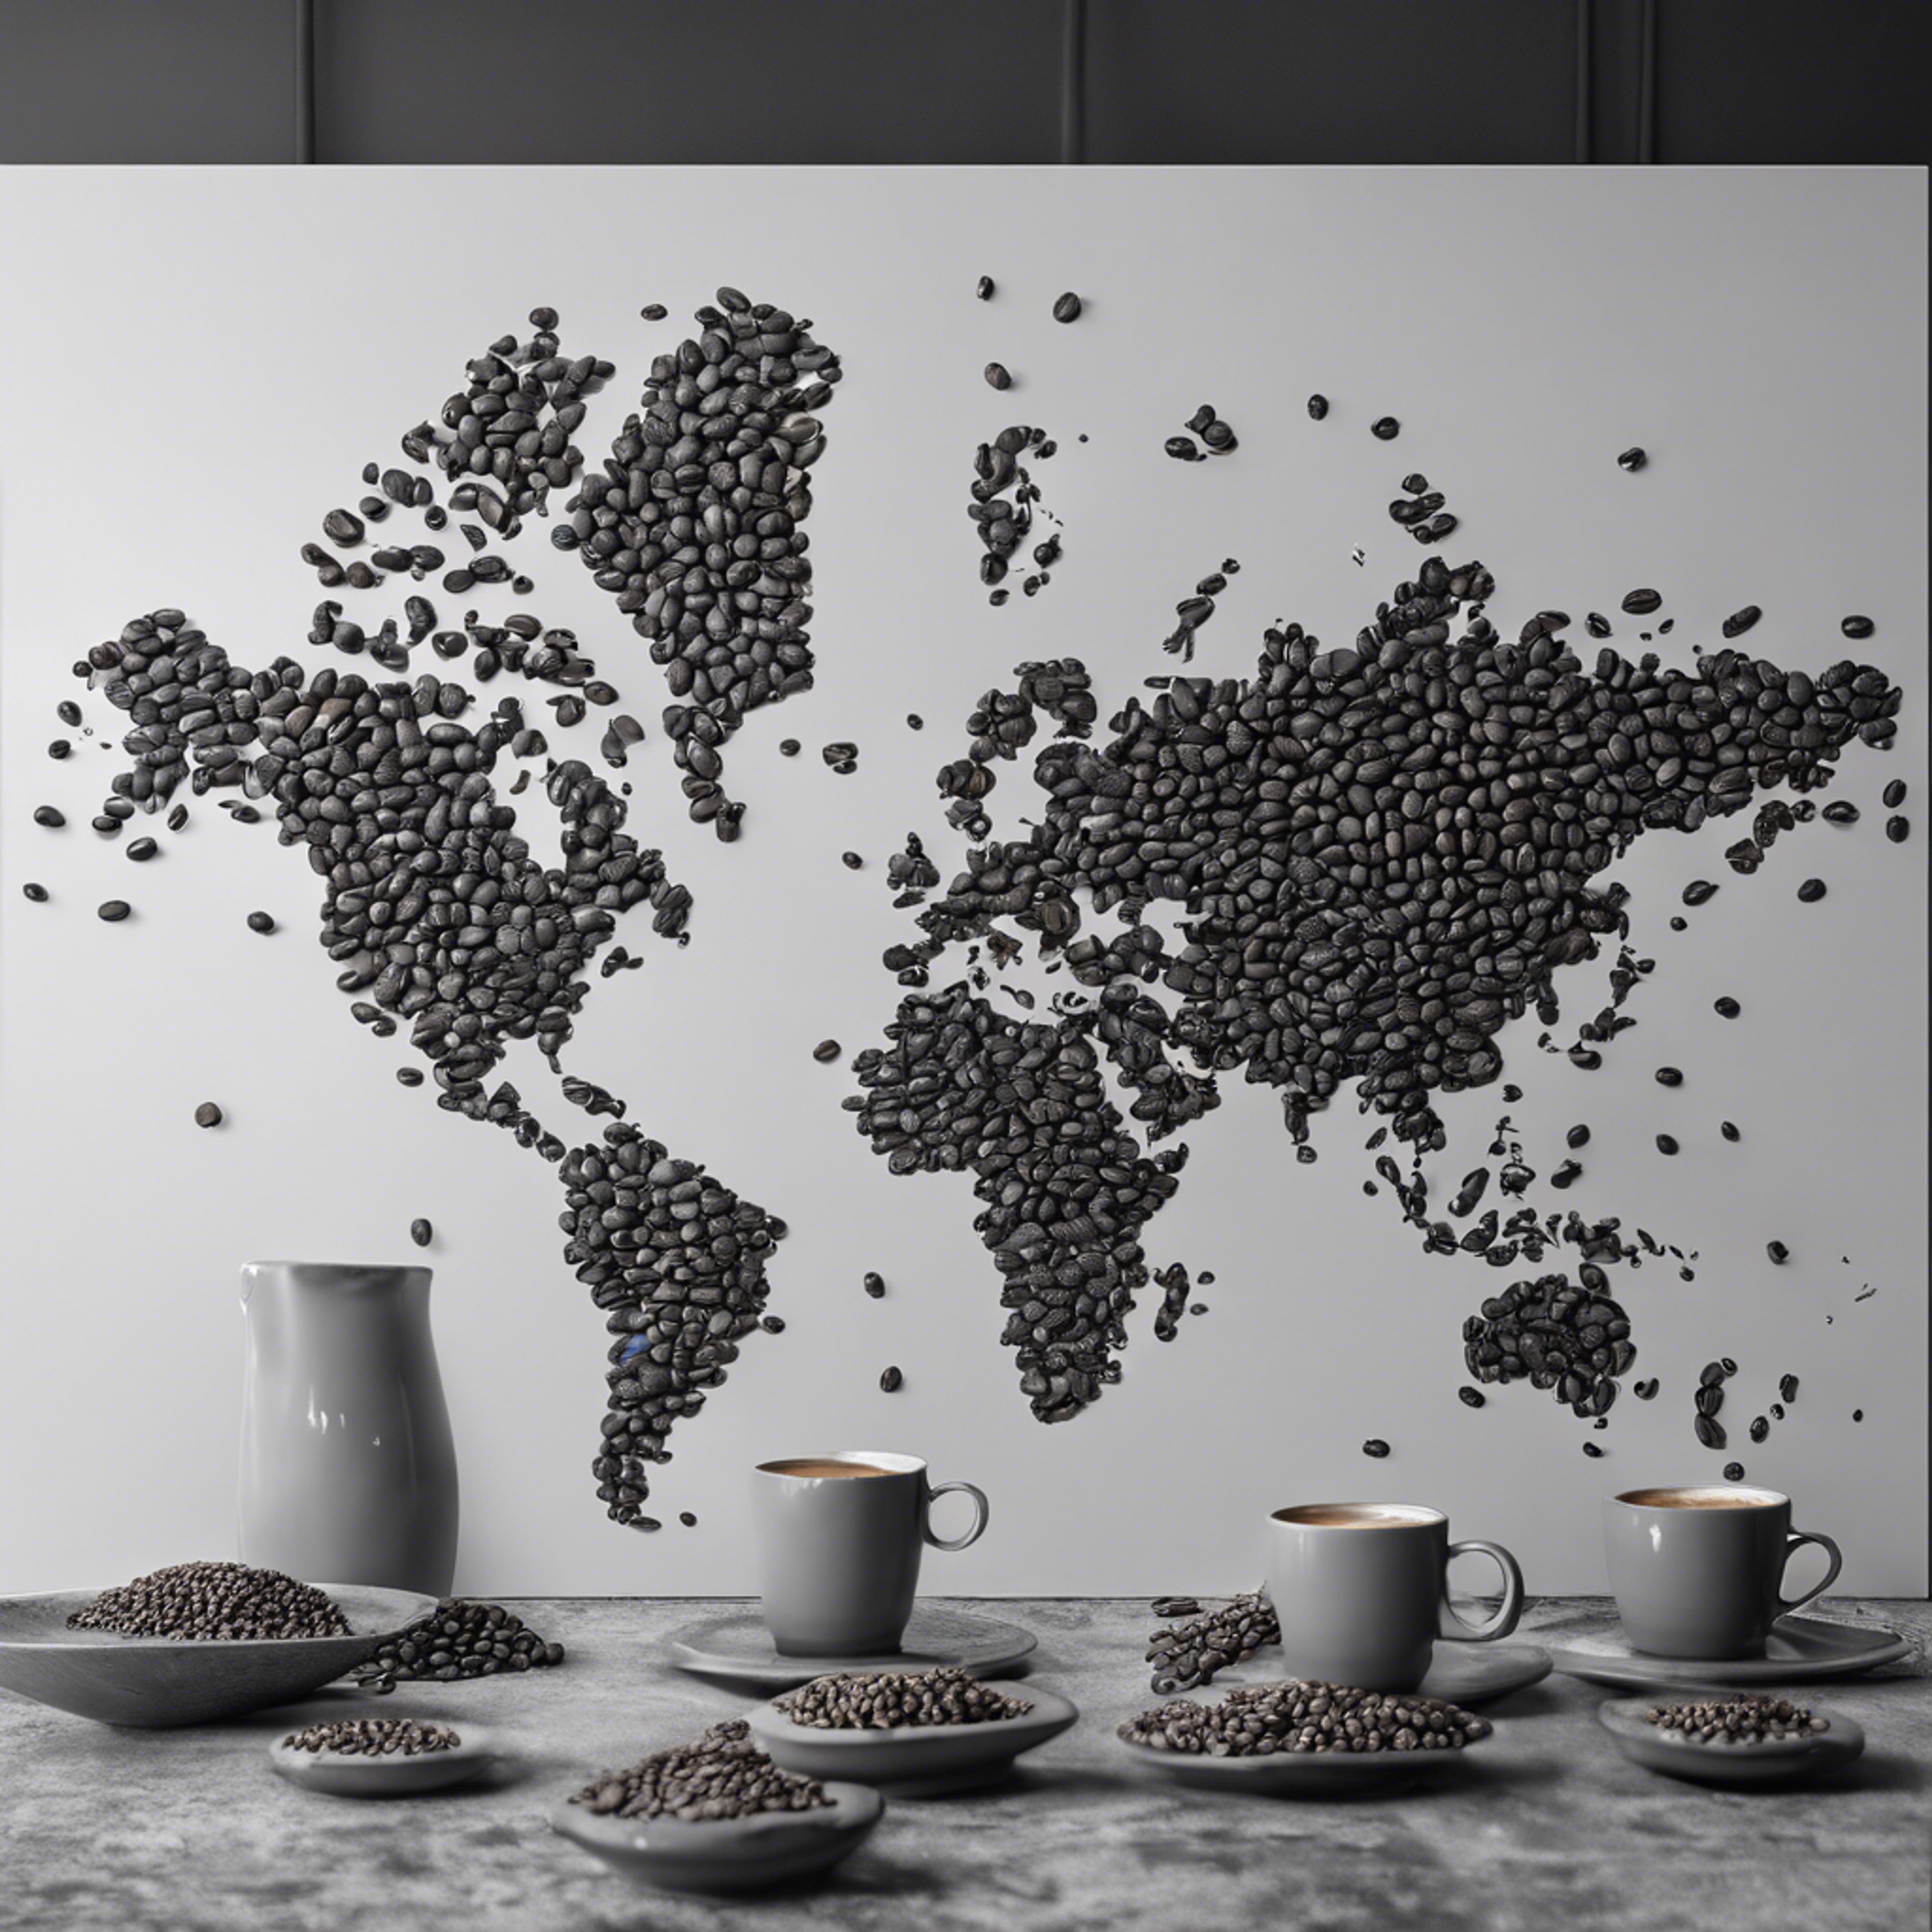 A grayscale world map laid out with coffee beans on a cafe table. Обои[a42175c9d73a43528667]